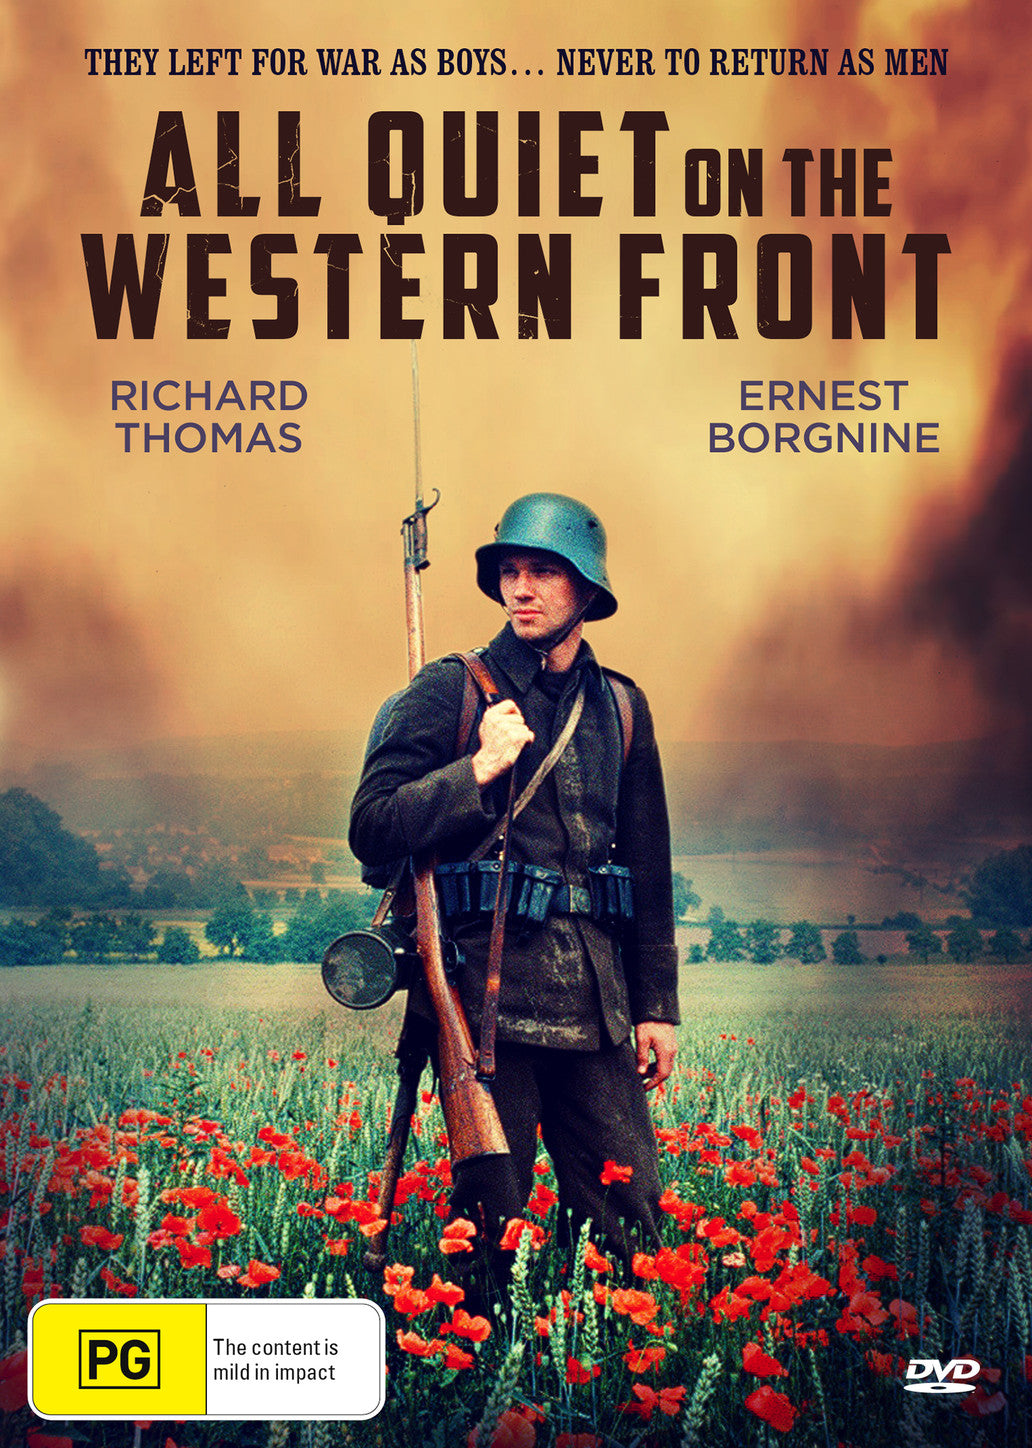 ALL QUIET ON THE WESTERN FRONT (1979)